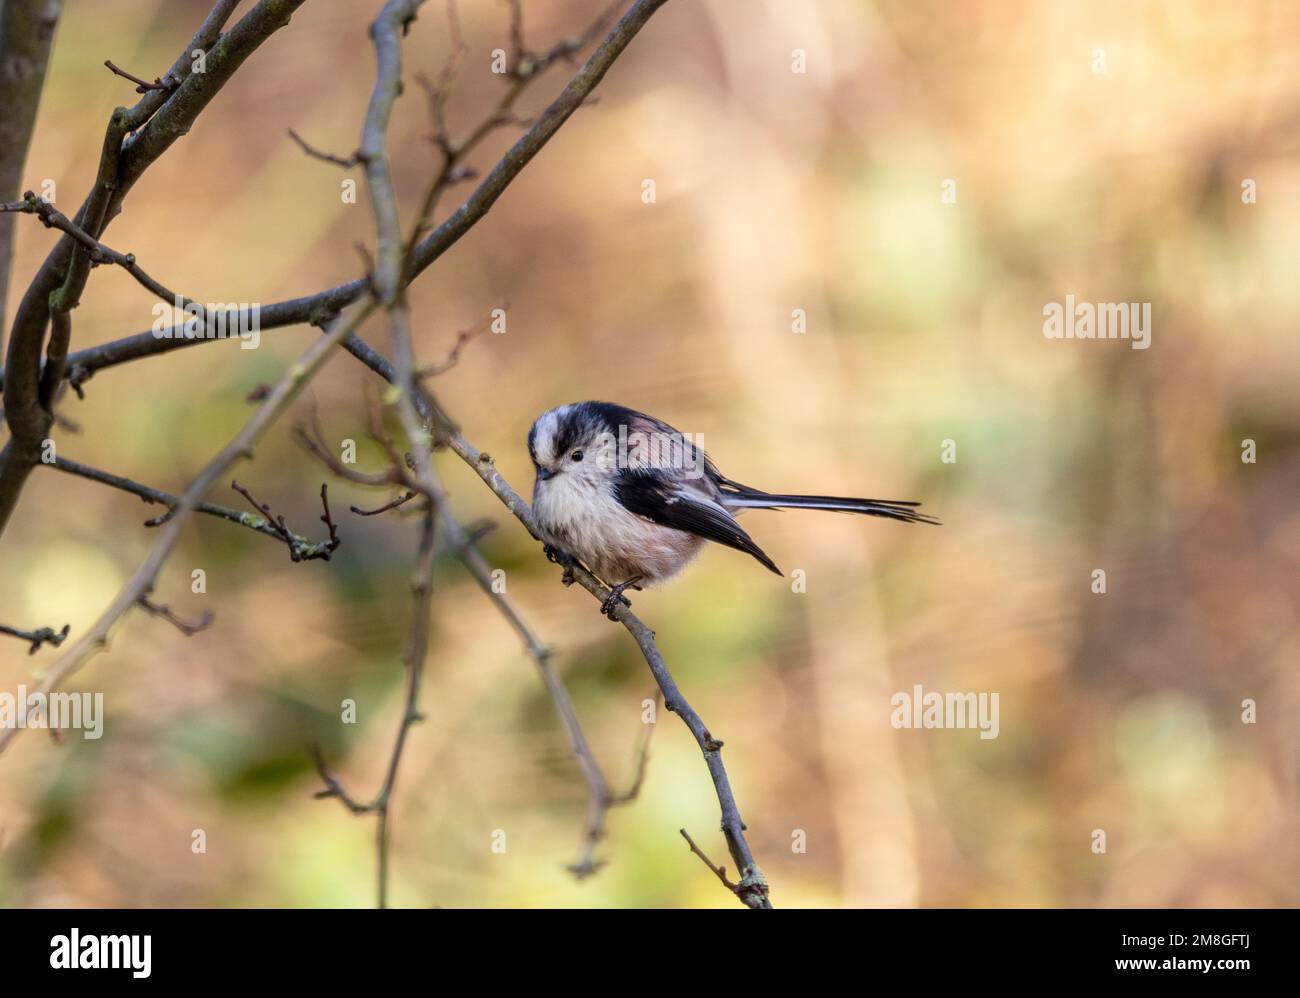 A tiny active bird usually in the upper canopy, the Long-tailed Tit is often heard rather than see. They travel in tightly knit family groups. Stock Photo